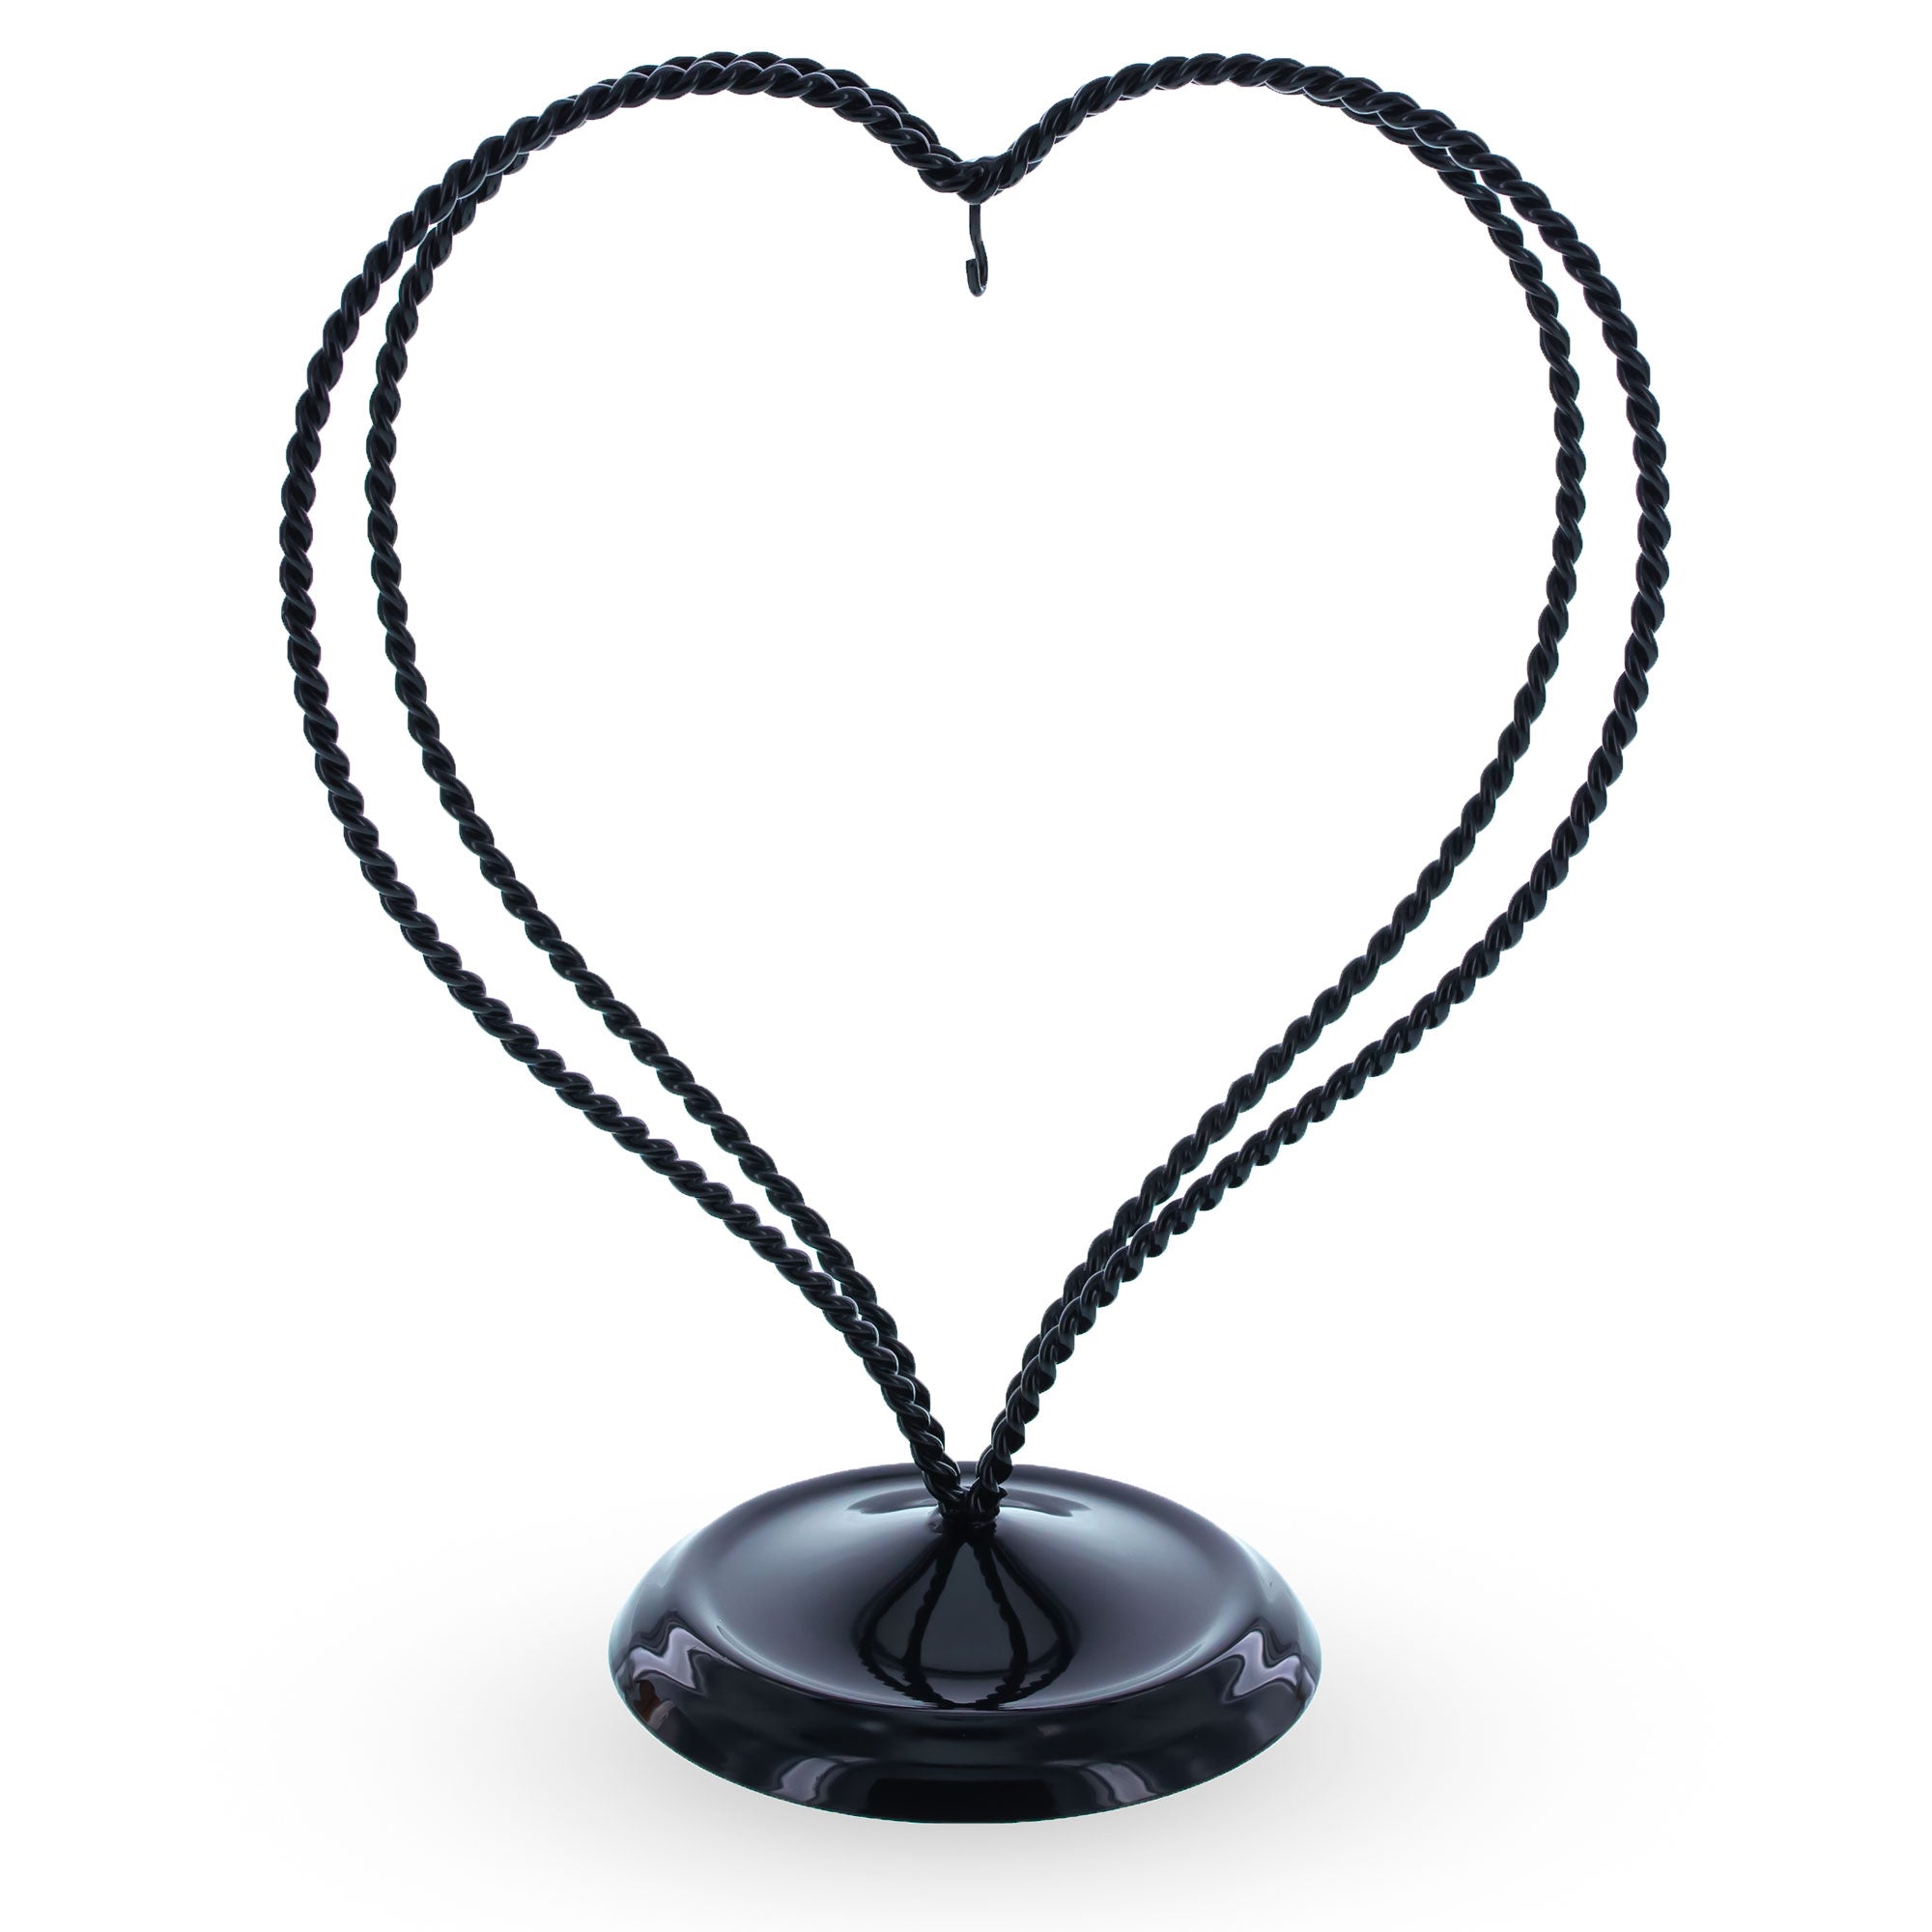 Metal Heart with Base